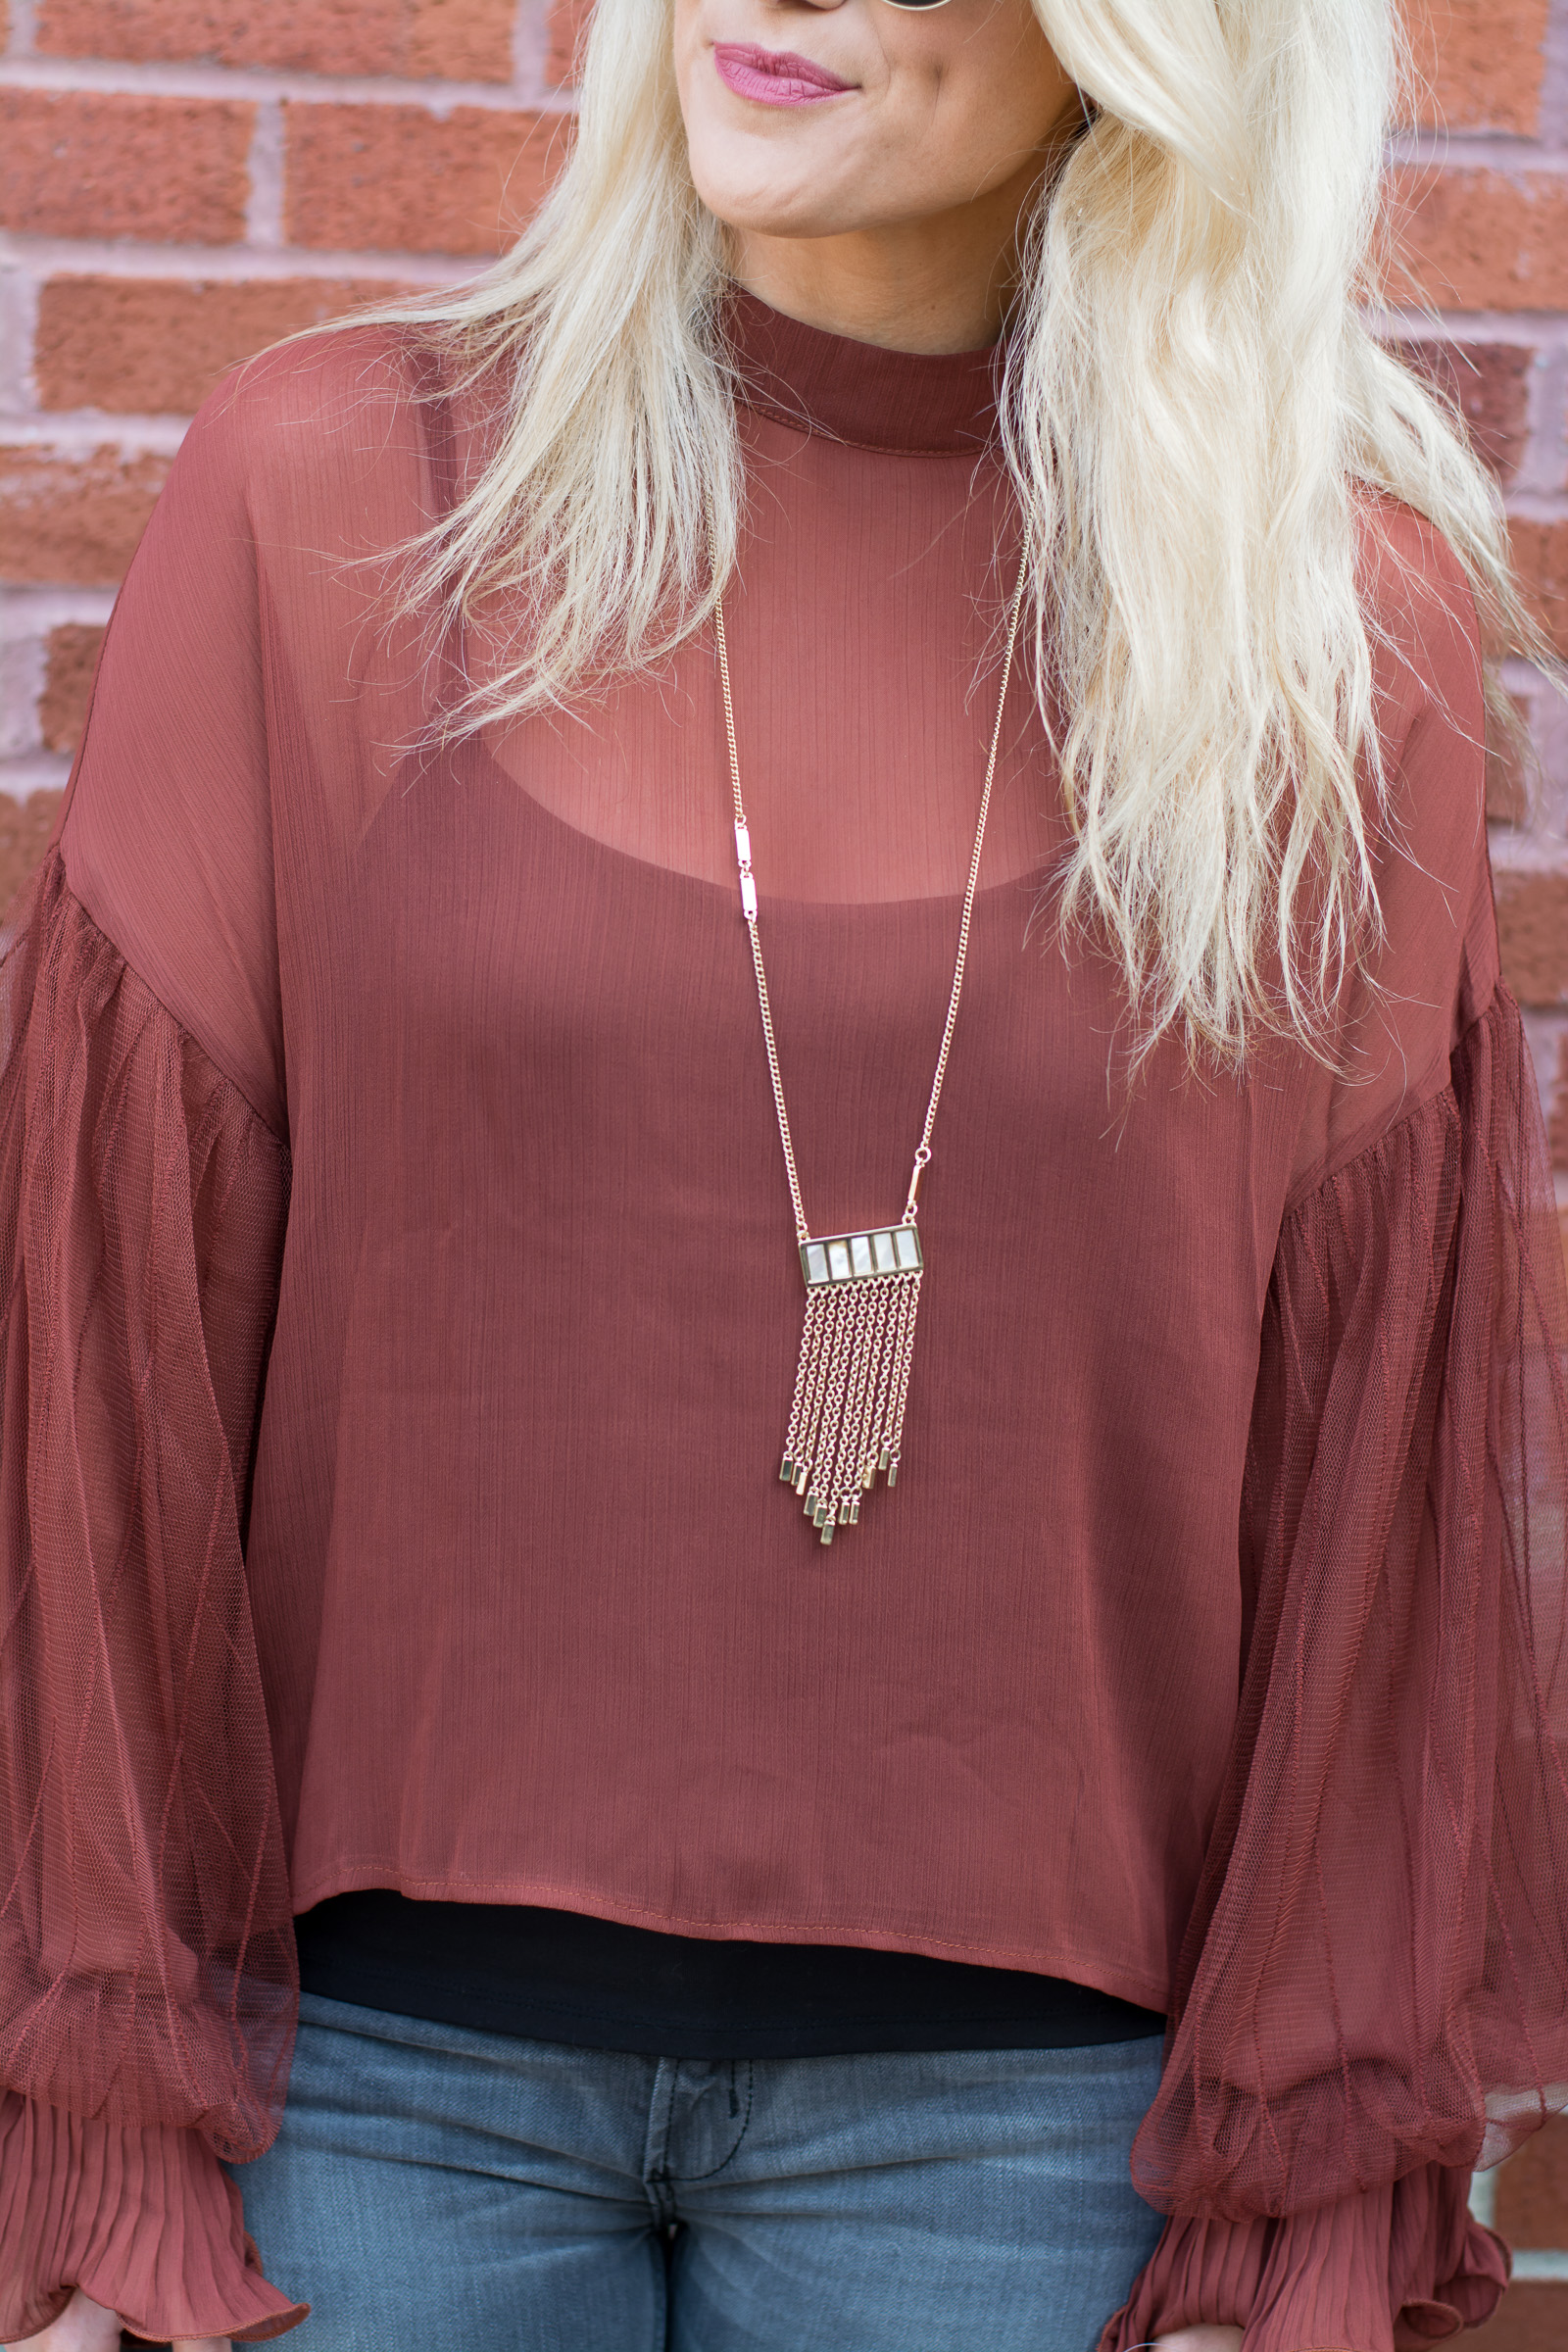 Casual Holiday Outfit: Rust Blouse + Gray Jeans. | Ashley from LSR